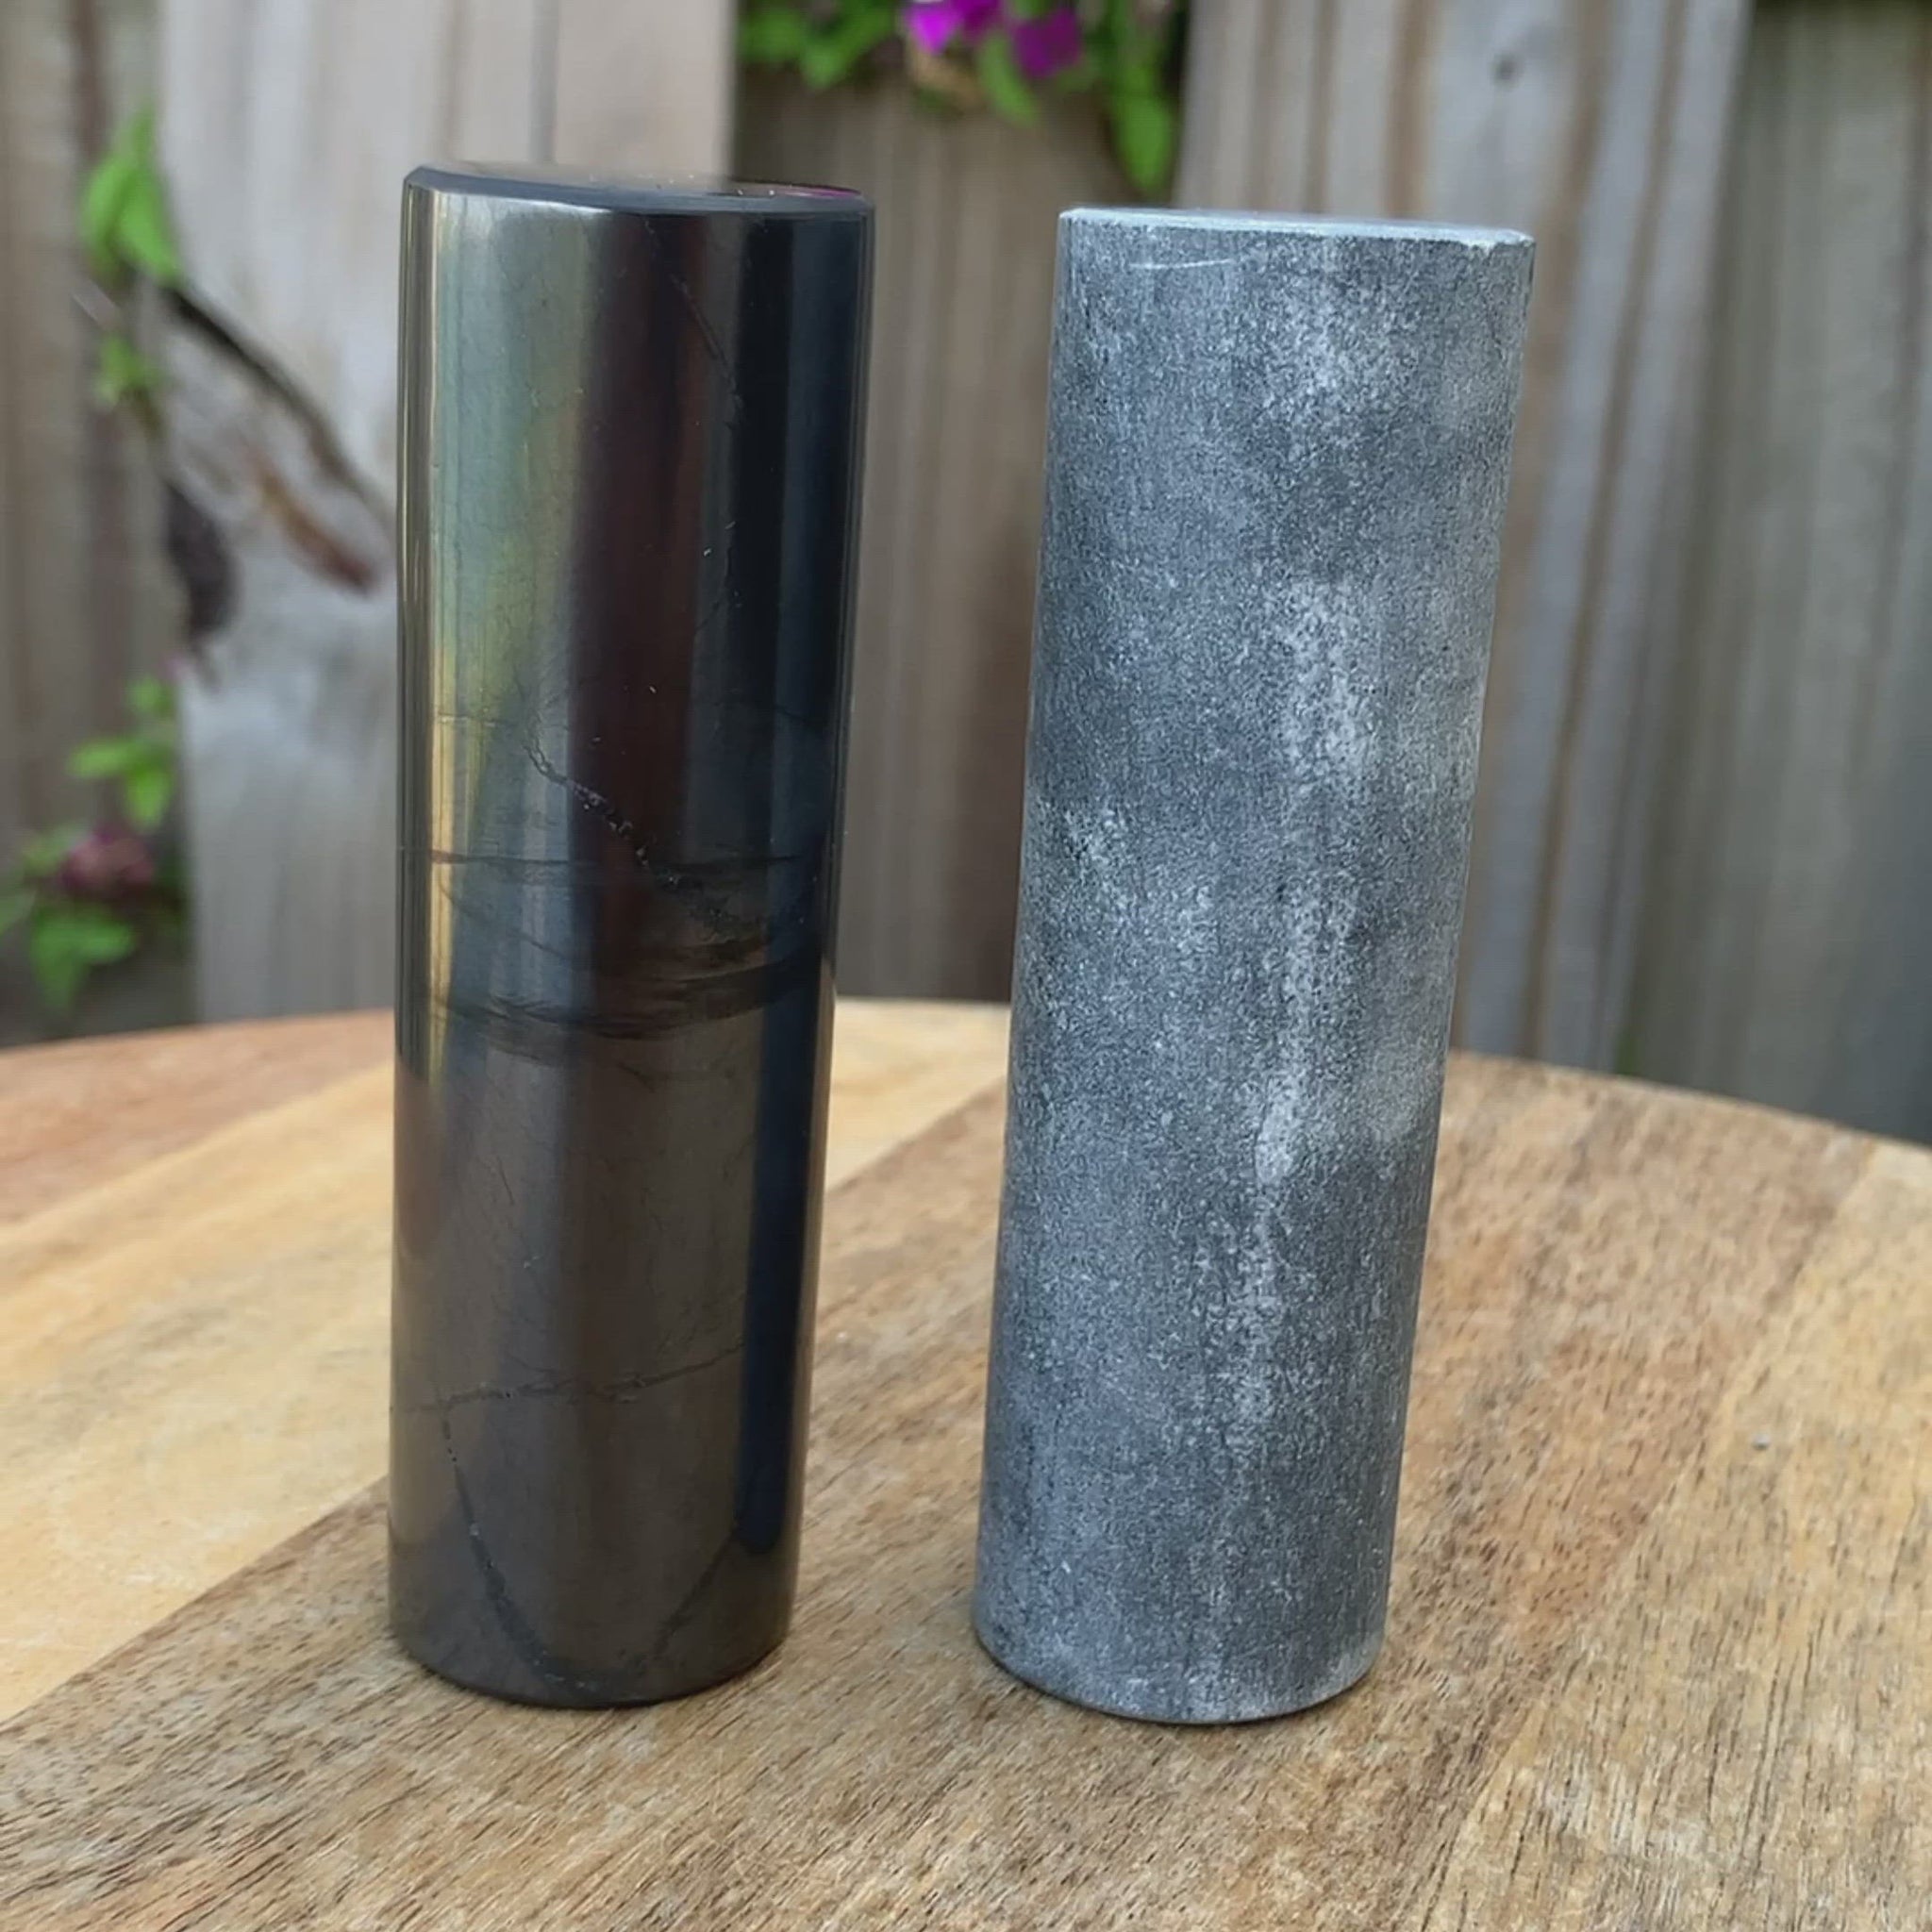 Shop for Shungite at magic crystals. Find Shungite and Soapstone Harmonizers Cylinders EMF Tools at Magic Crystals. Purification, Reiki, EMF Protection.Shungite plates for cell phone Engraved images | Made of natural shungite stone various image | Shungite EMF protection shield.